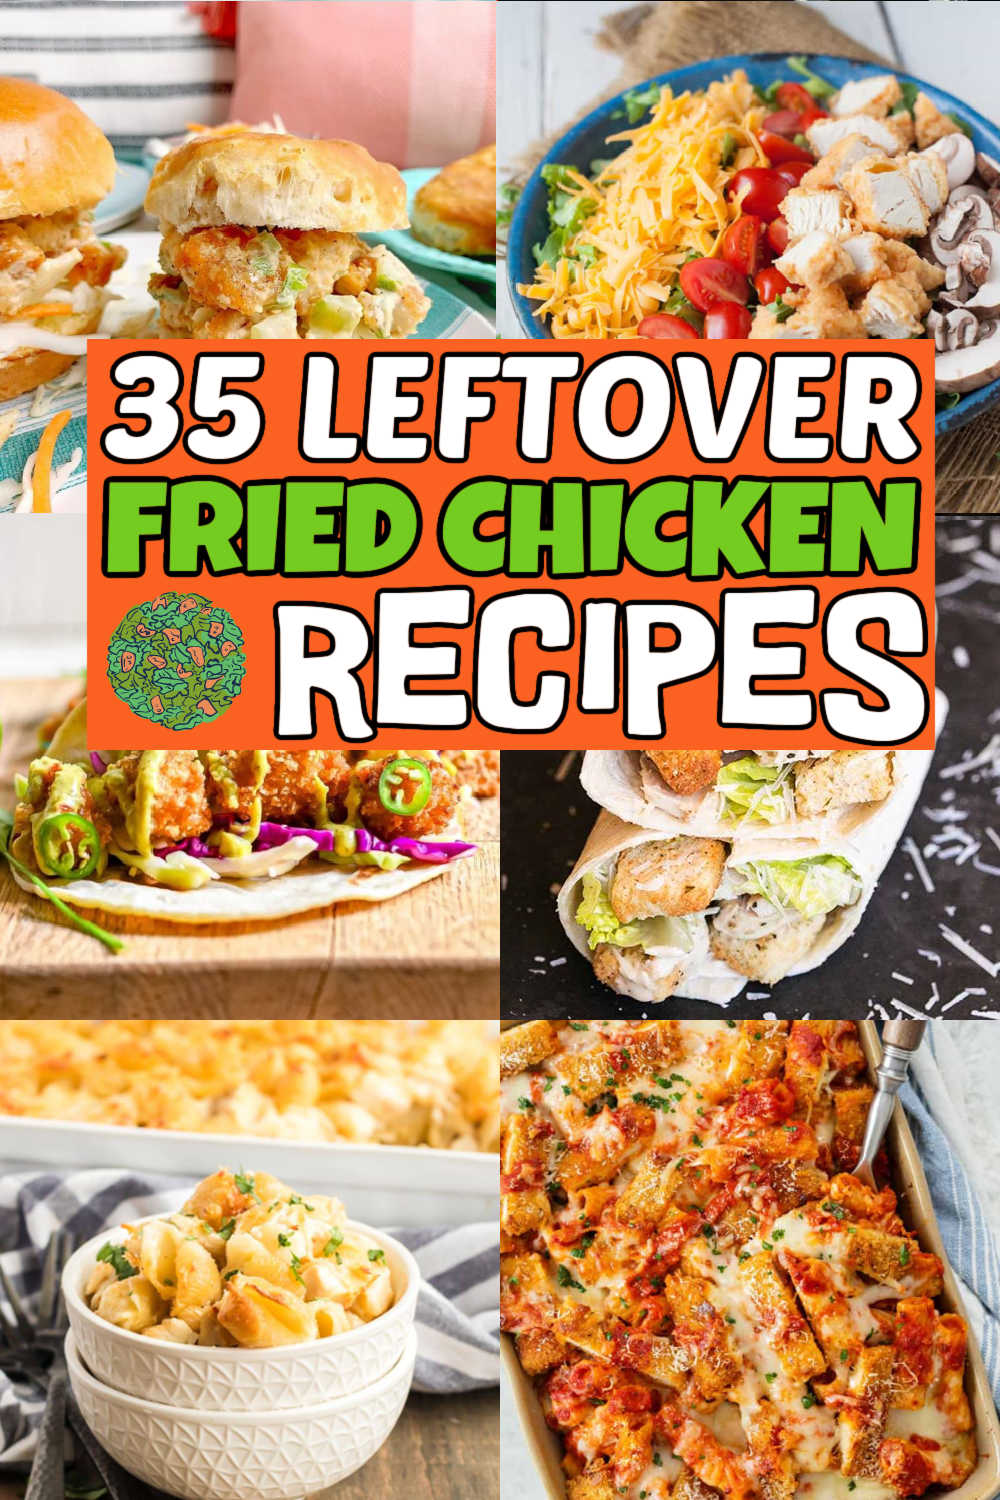 Say hello to the tantalizing world of leftover fried chicken recipes. These recipes are mouth watering and easy to make with fried chicken. Get ready to unlock a world of delicious possibilities with every leftover bite. #eatingonadime #leftoverfriedchickenrecipes #friedchickenrecipes